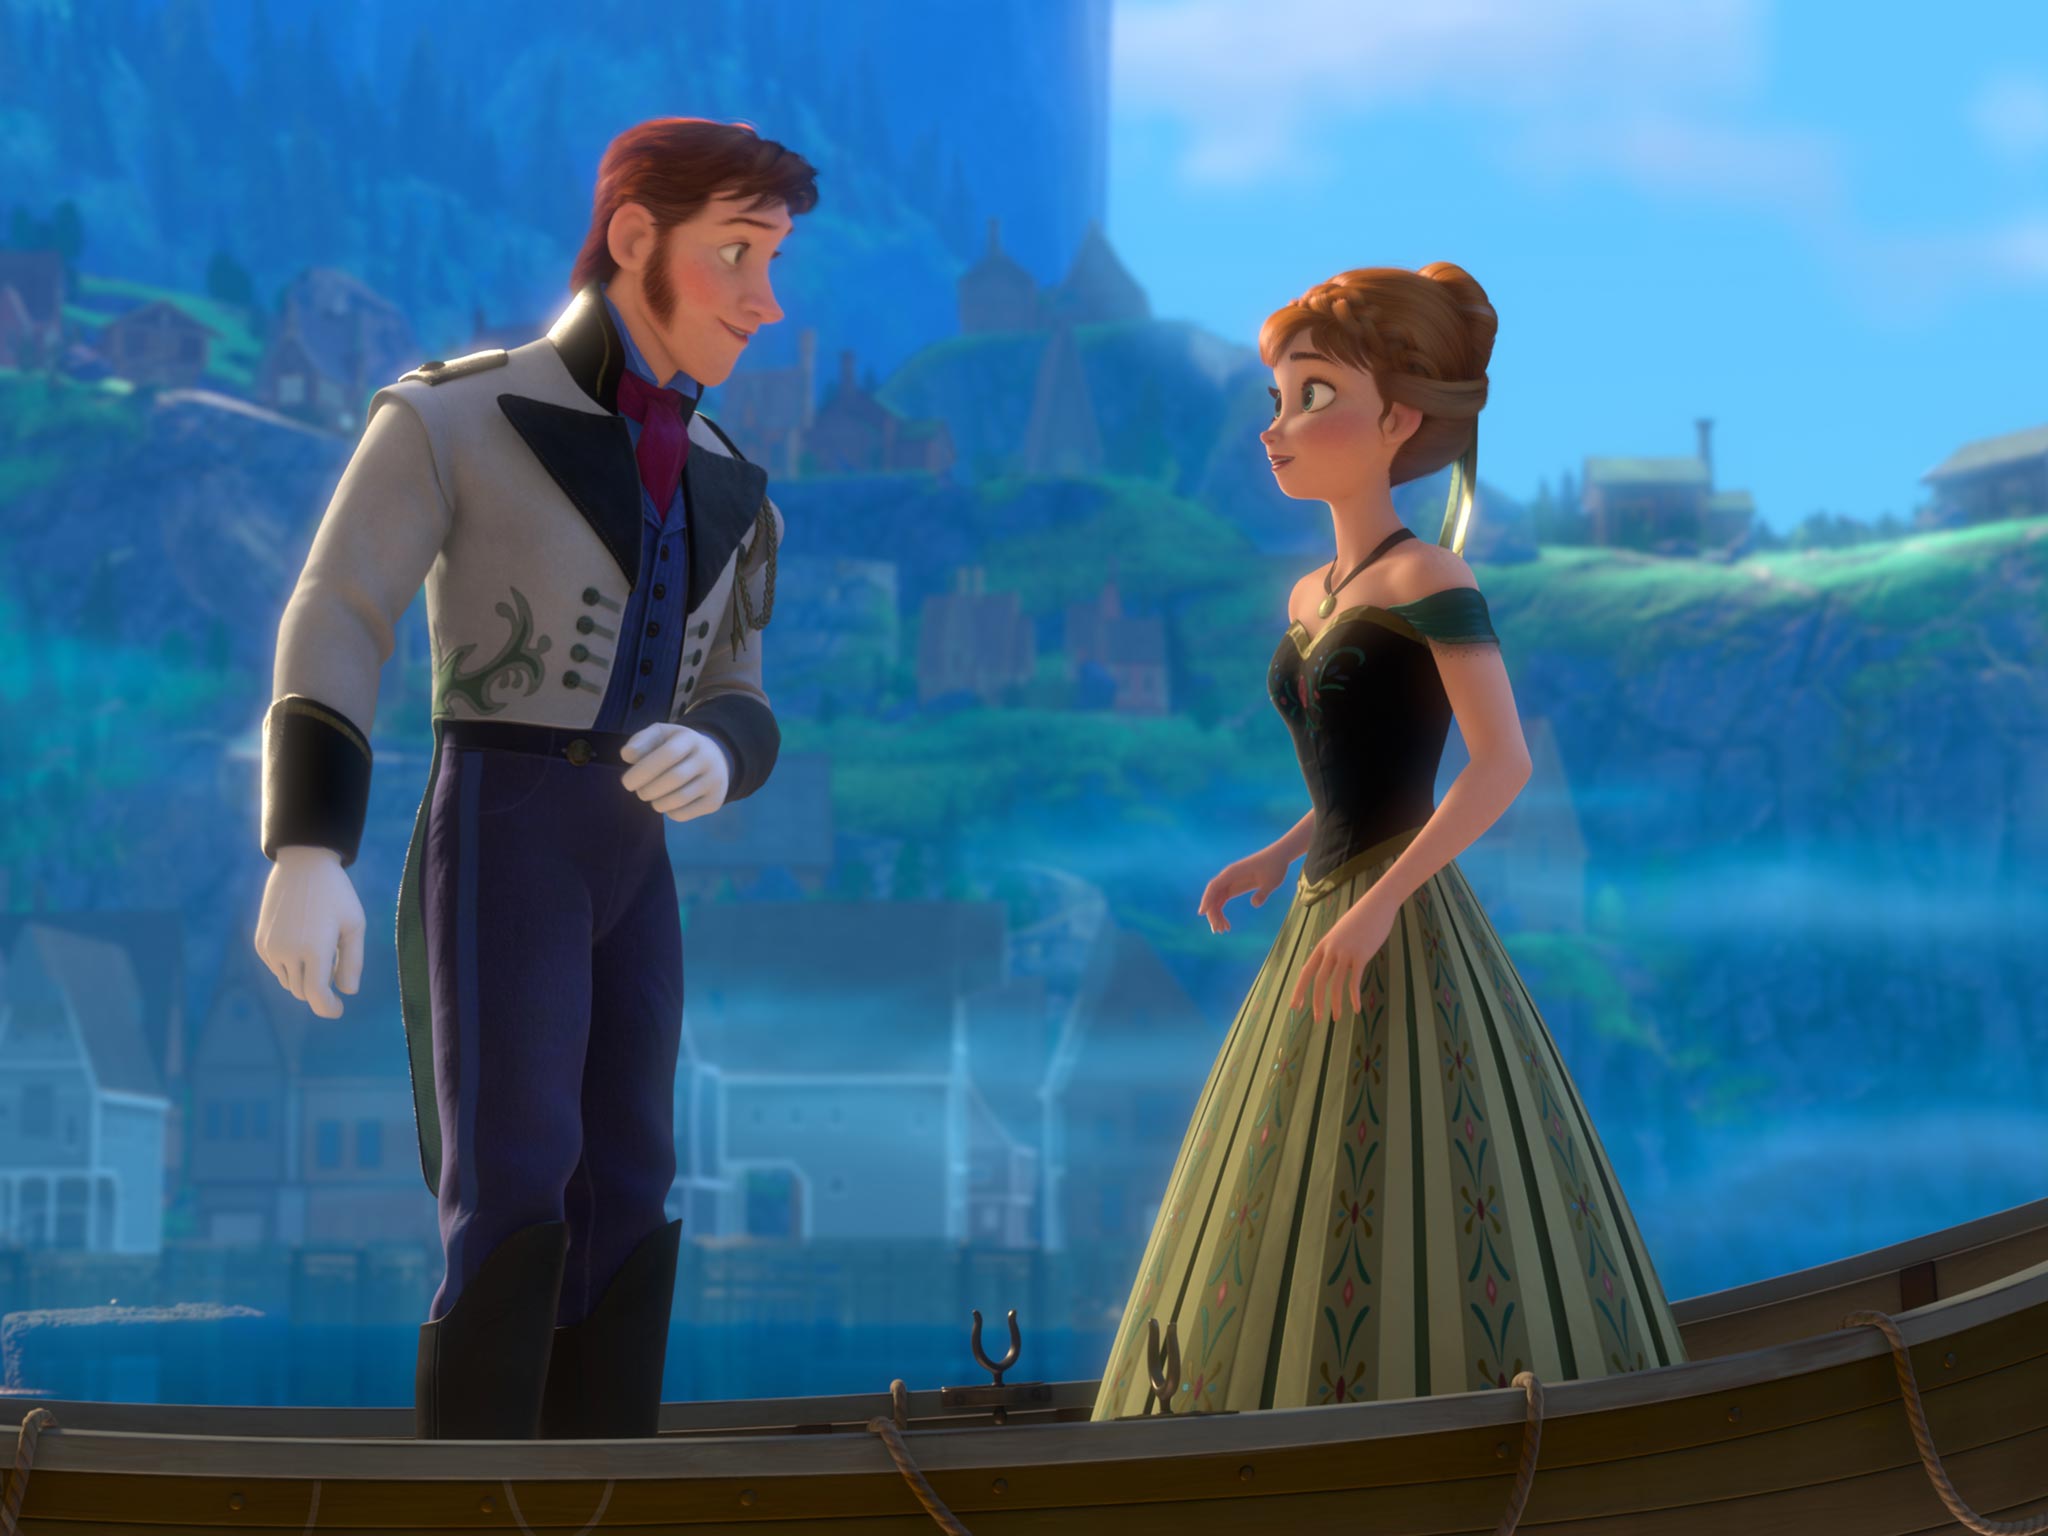 Fairytale accounts: Frozen’s faithful Norwegian setting has led many to visit the
country